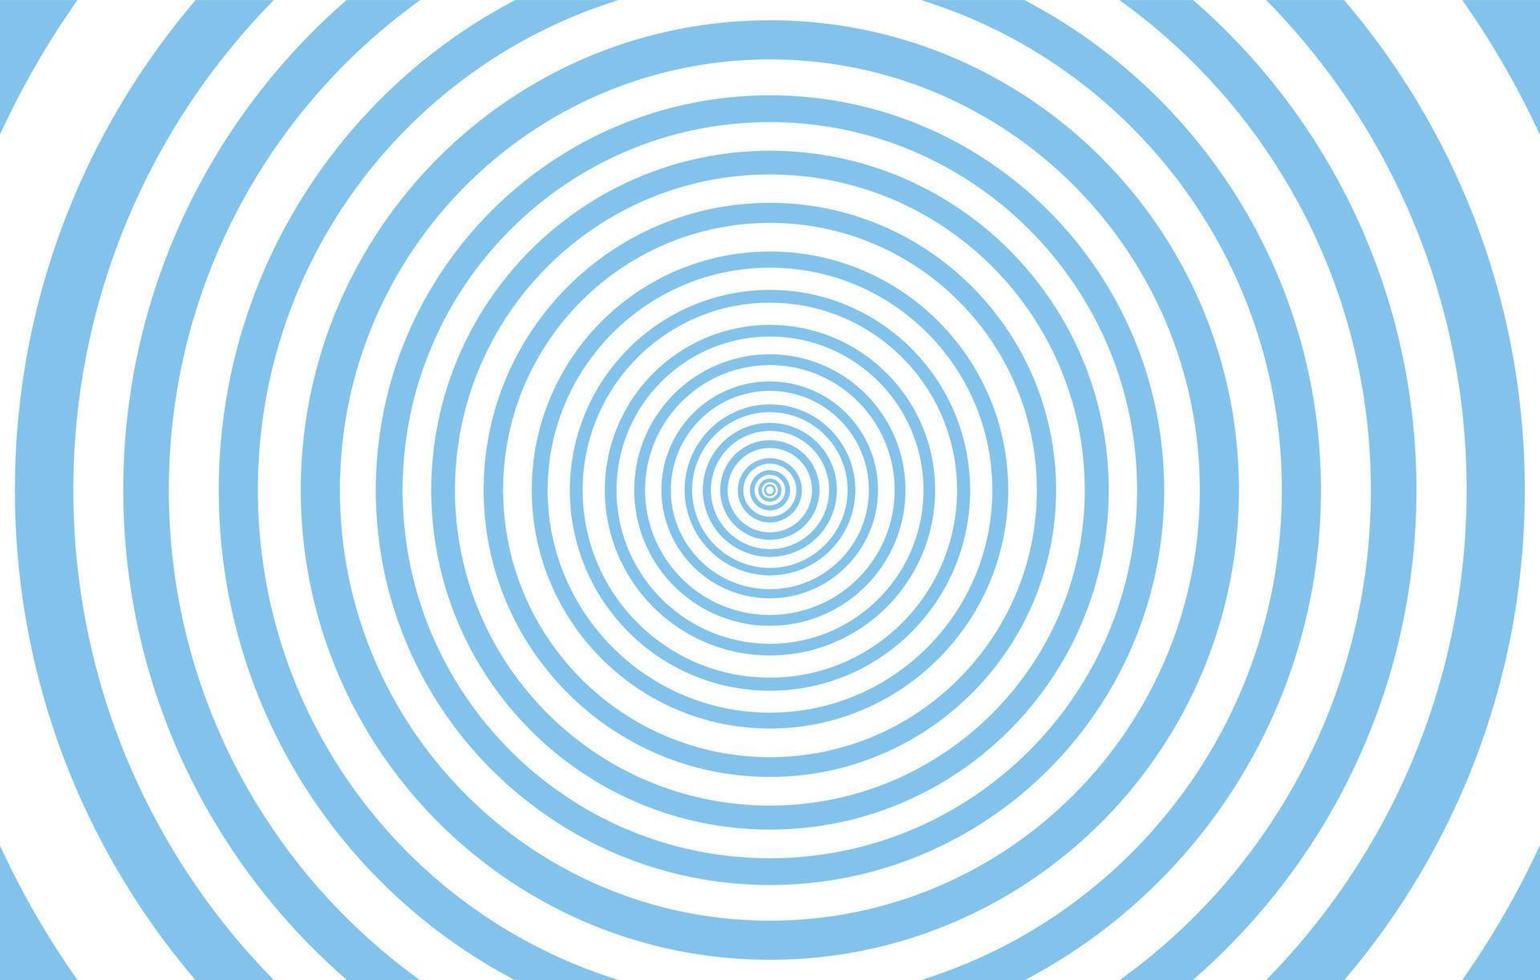 Background of blue concentric circles vector